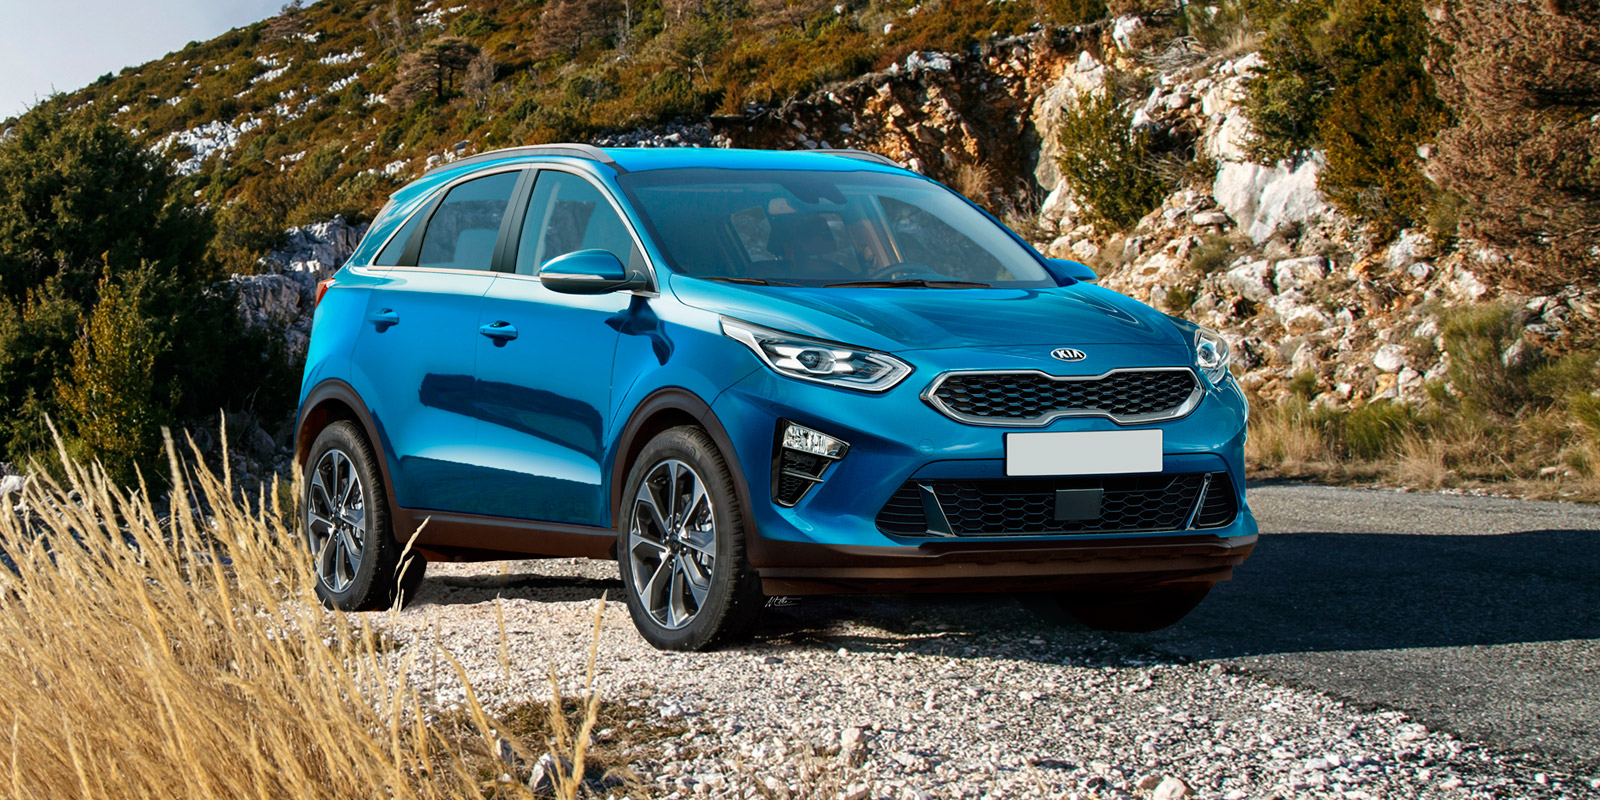 2019 Kia Ceed SUV price, specs and release date carwow